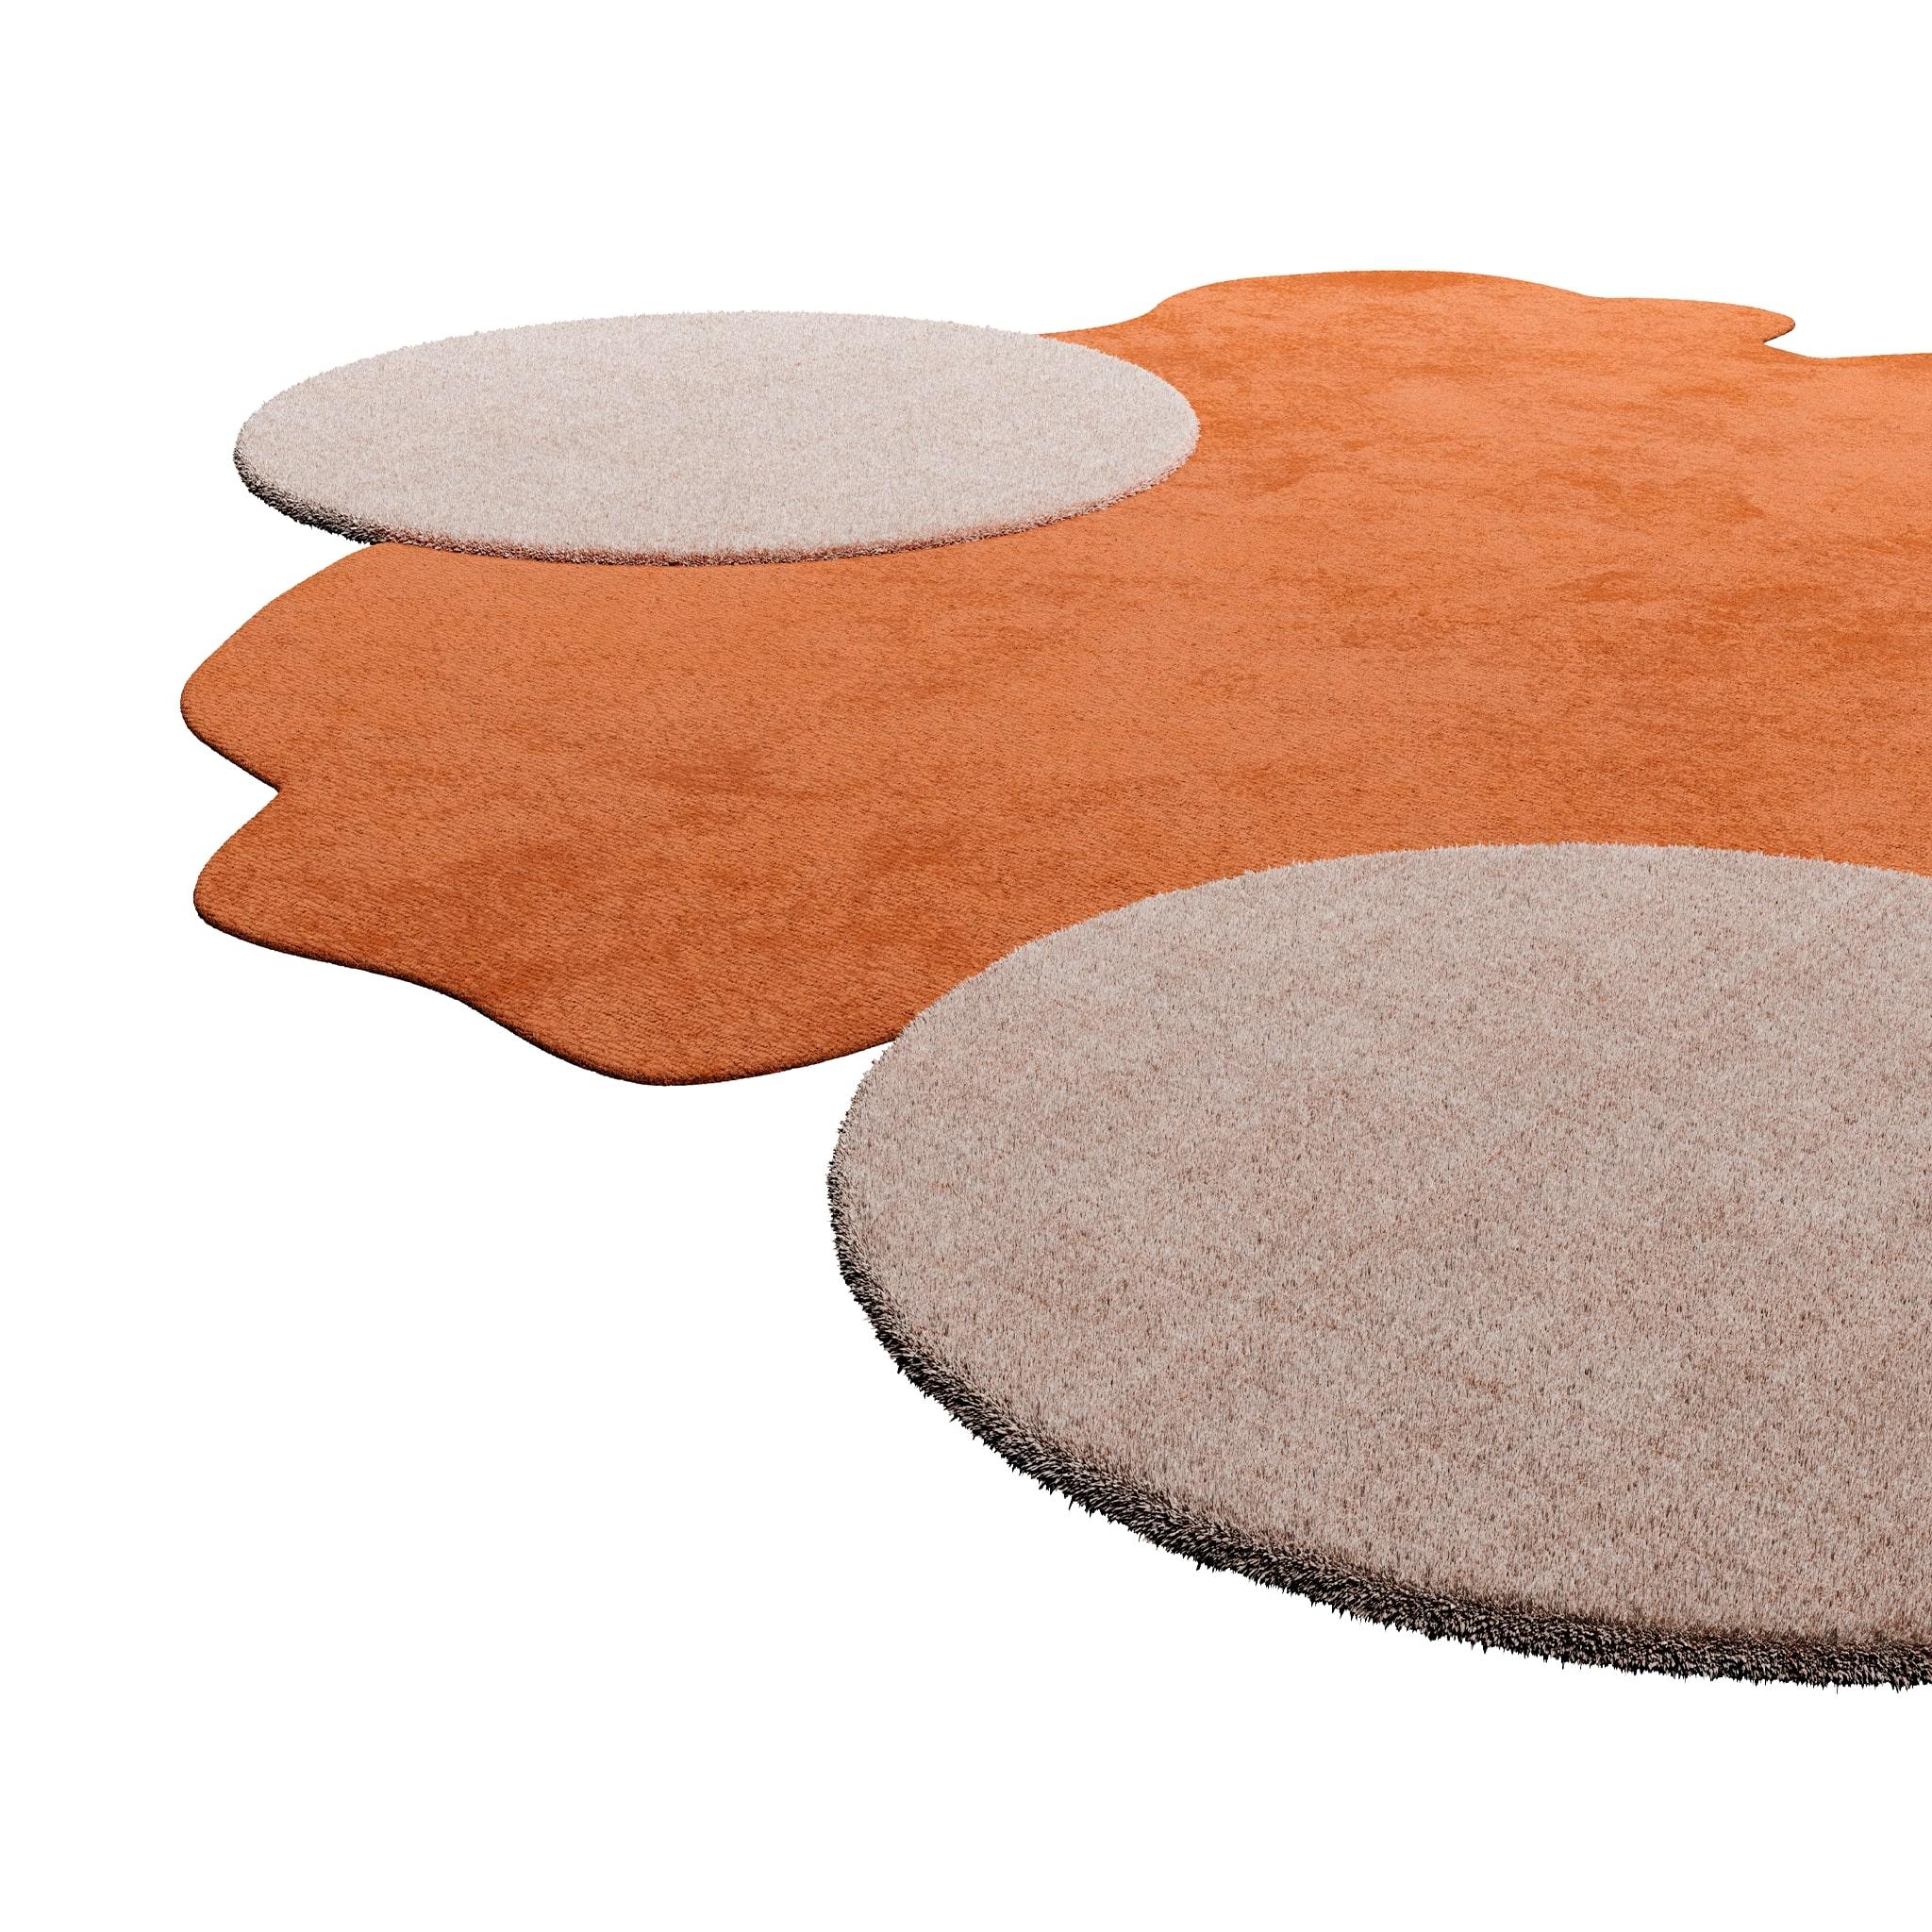 TAPIS Essential #008 is a modern rug that brings back mid-century modern vibes mixed with Memphis style.
With an irregular shape and neutral colors, the ochre and cream rug juxtaposes an organic shape and two oval circles, making this modern rug